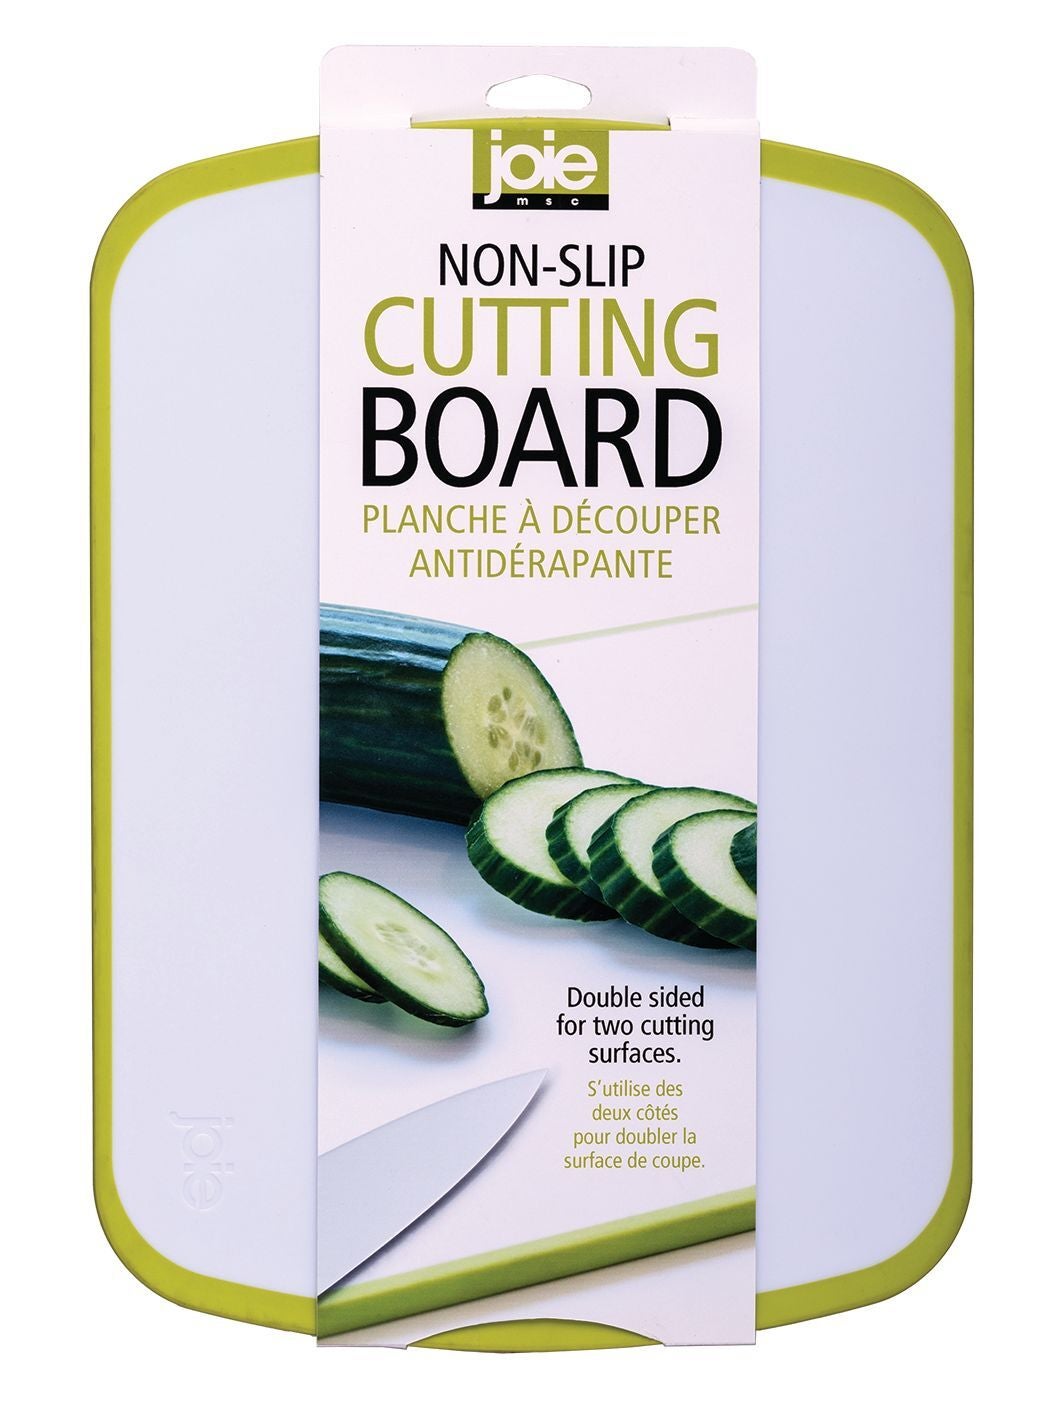 Non Slip Cutting Board by: JOIE